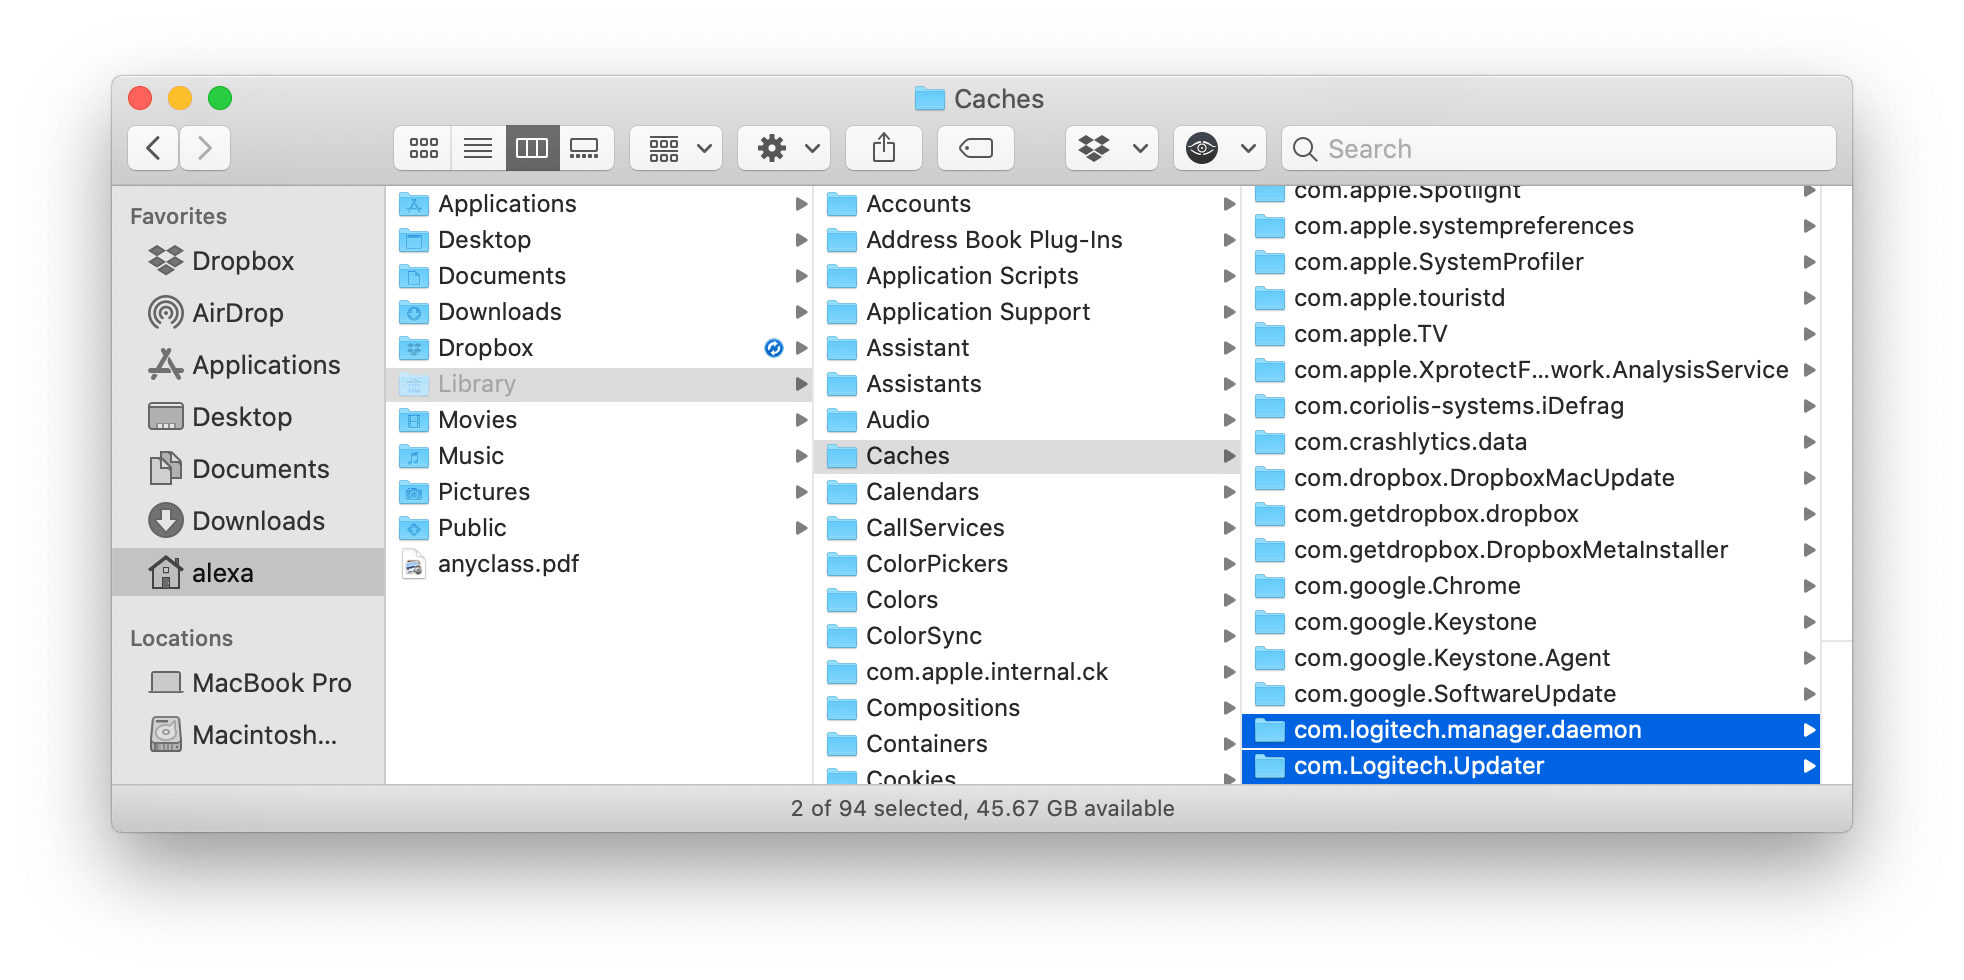 Finder window - Library folder - Logitech caches files